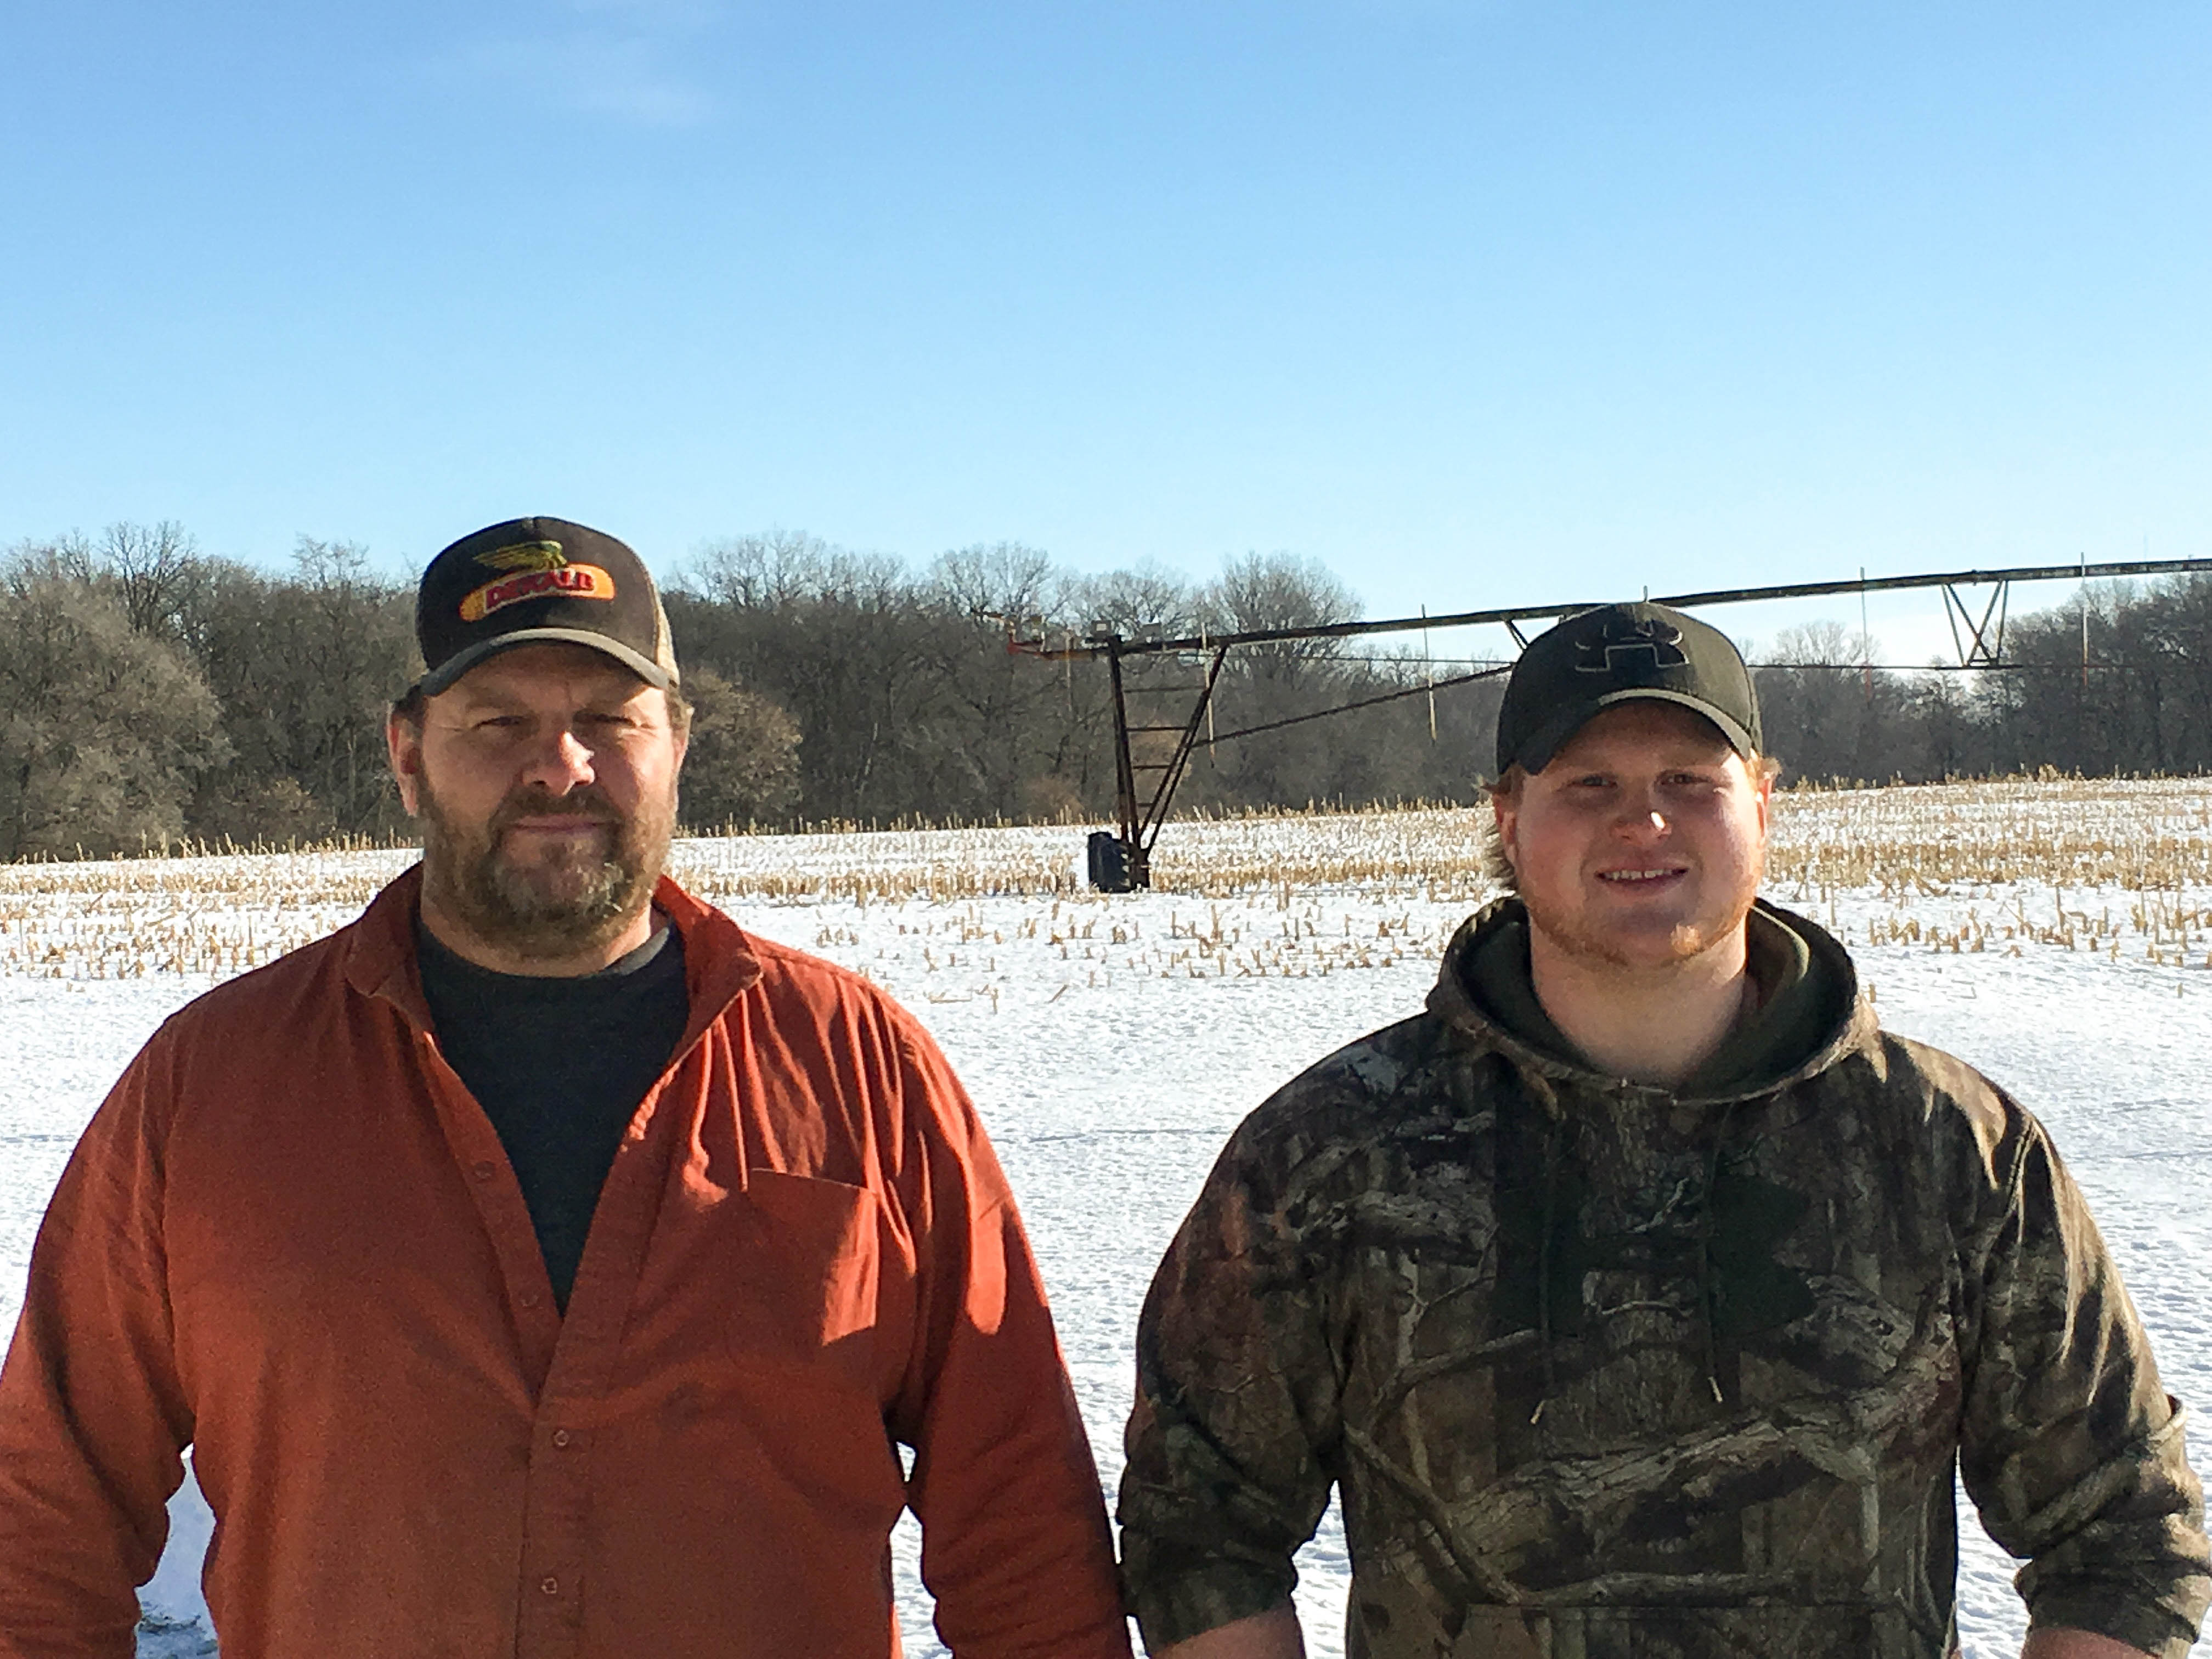 Jeff and Jake Lake farm about 1,600 acres in Dunn County, Wisconsin, with grain production, profitability, soil health and wildlife habitat in mind.